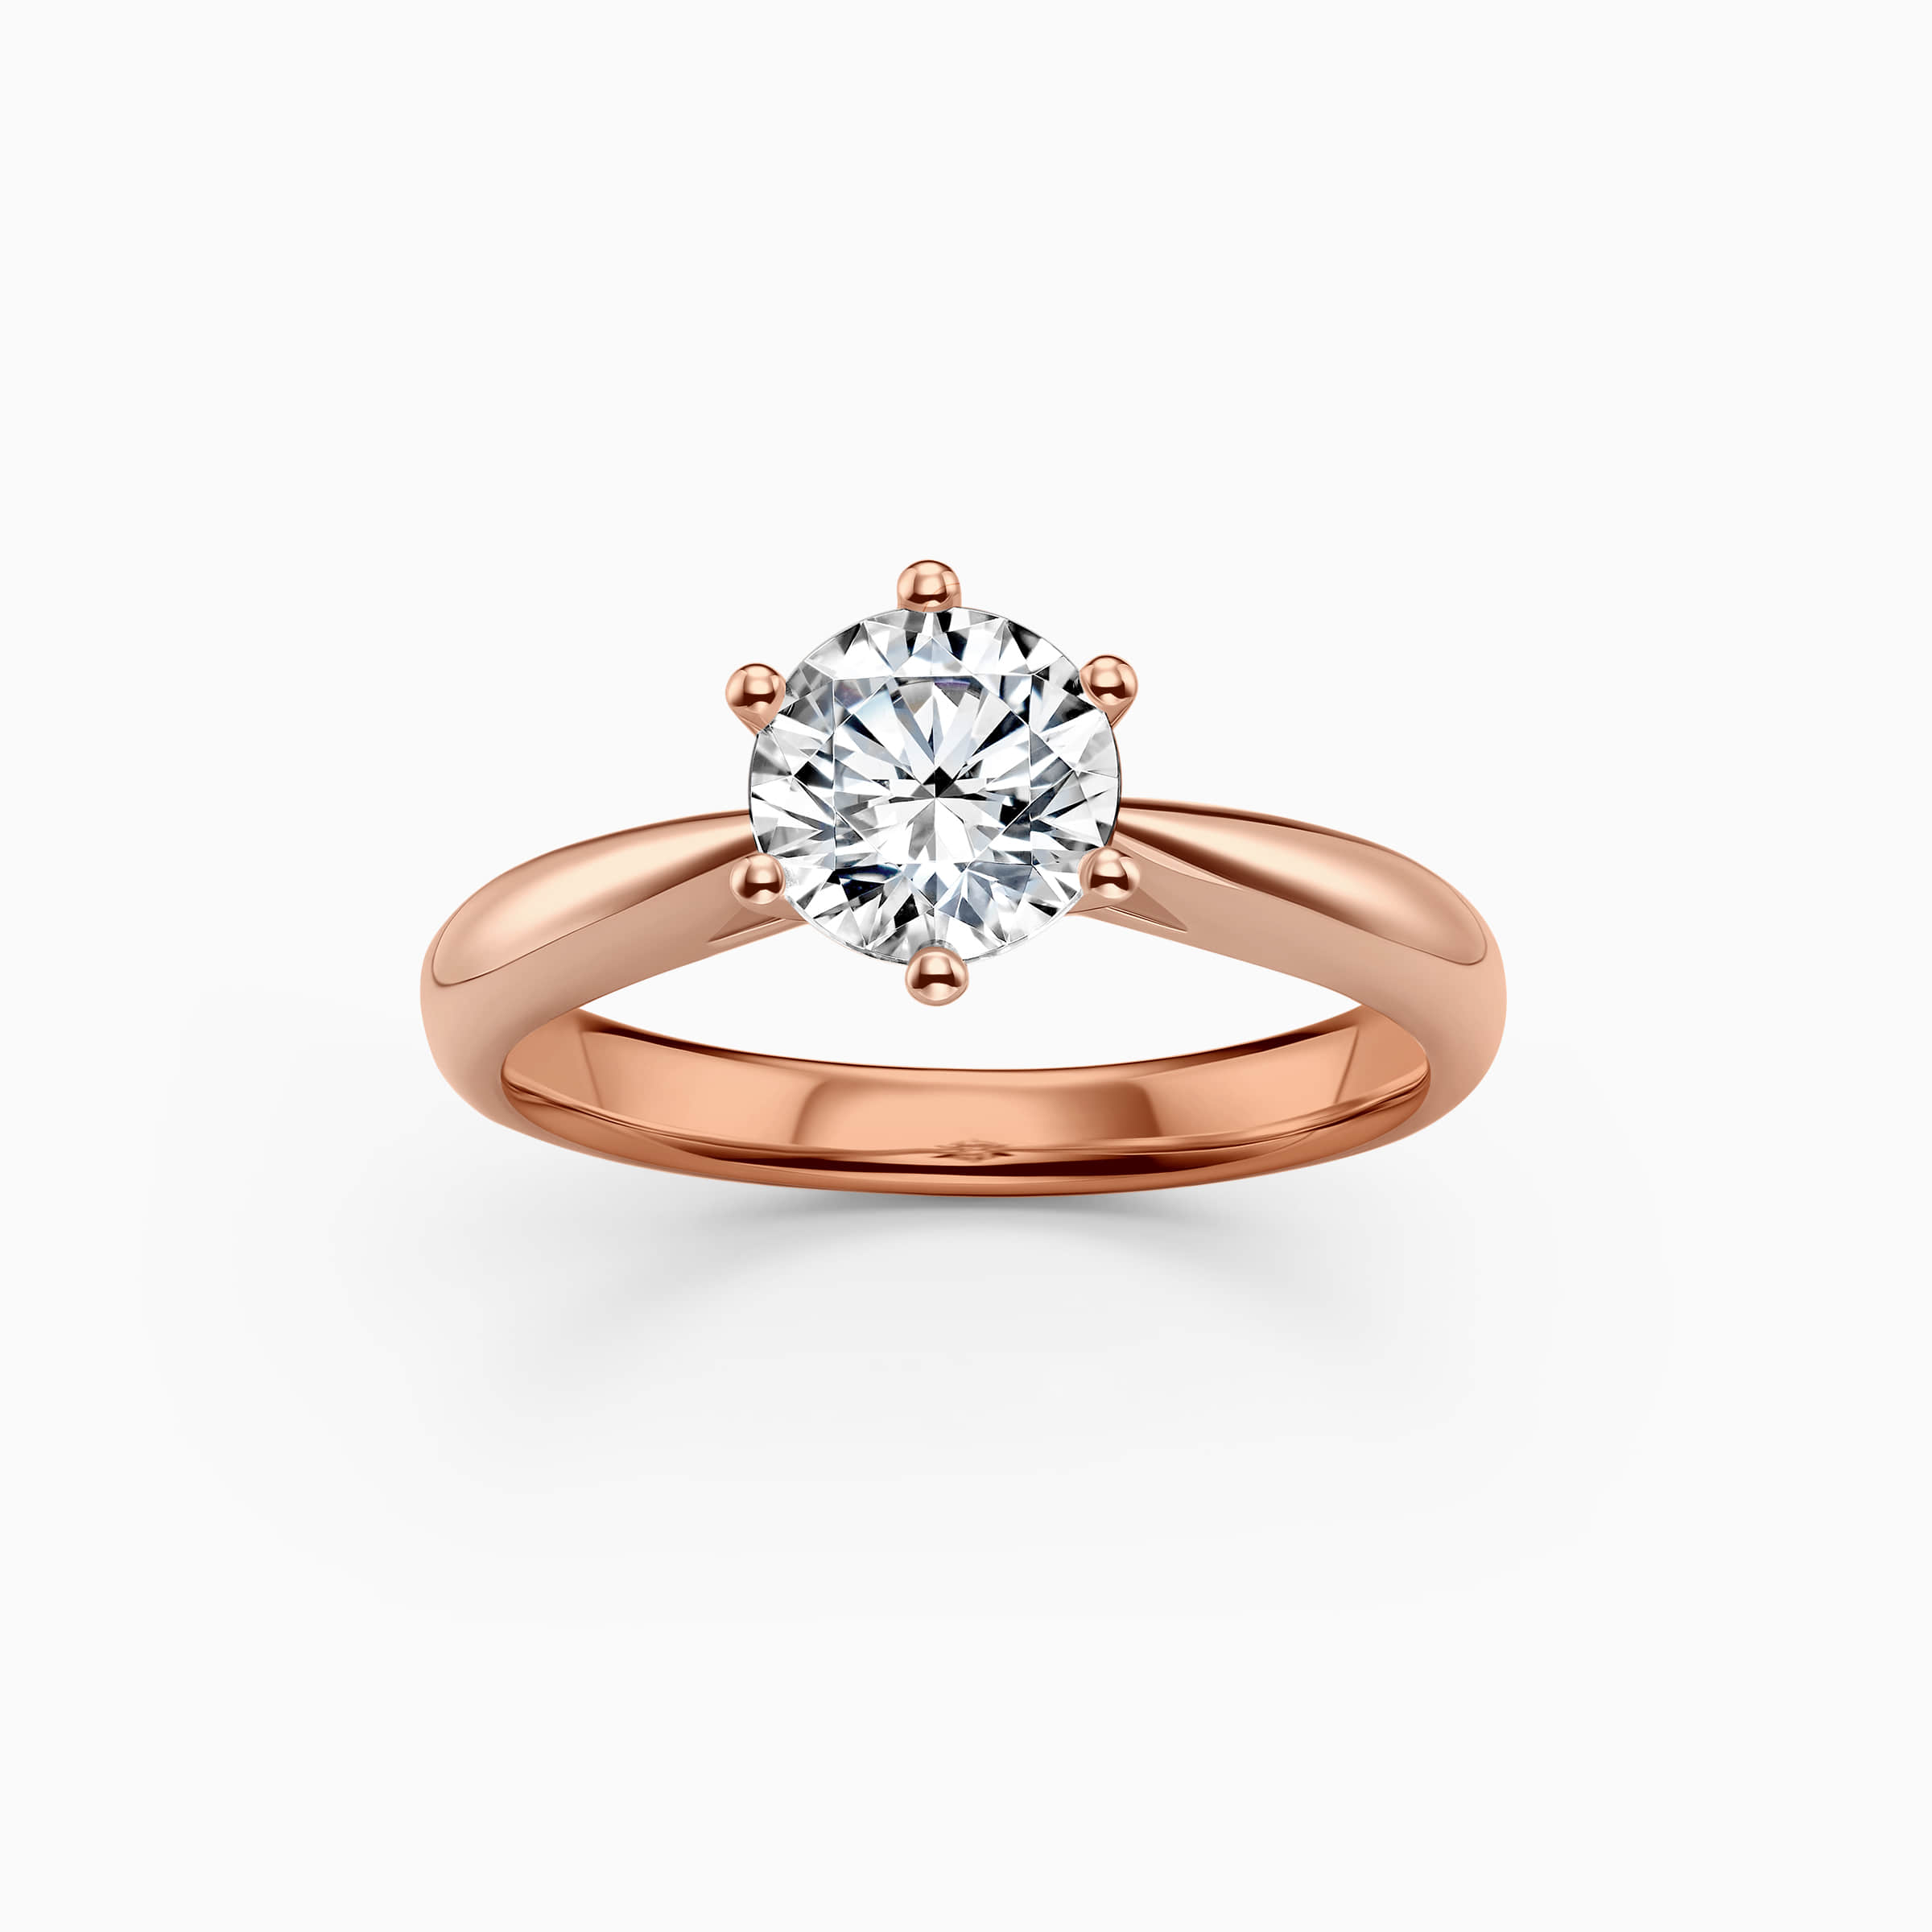 Darry Ring 6 prong promise ring in rose gold